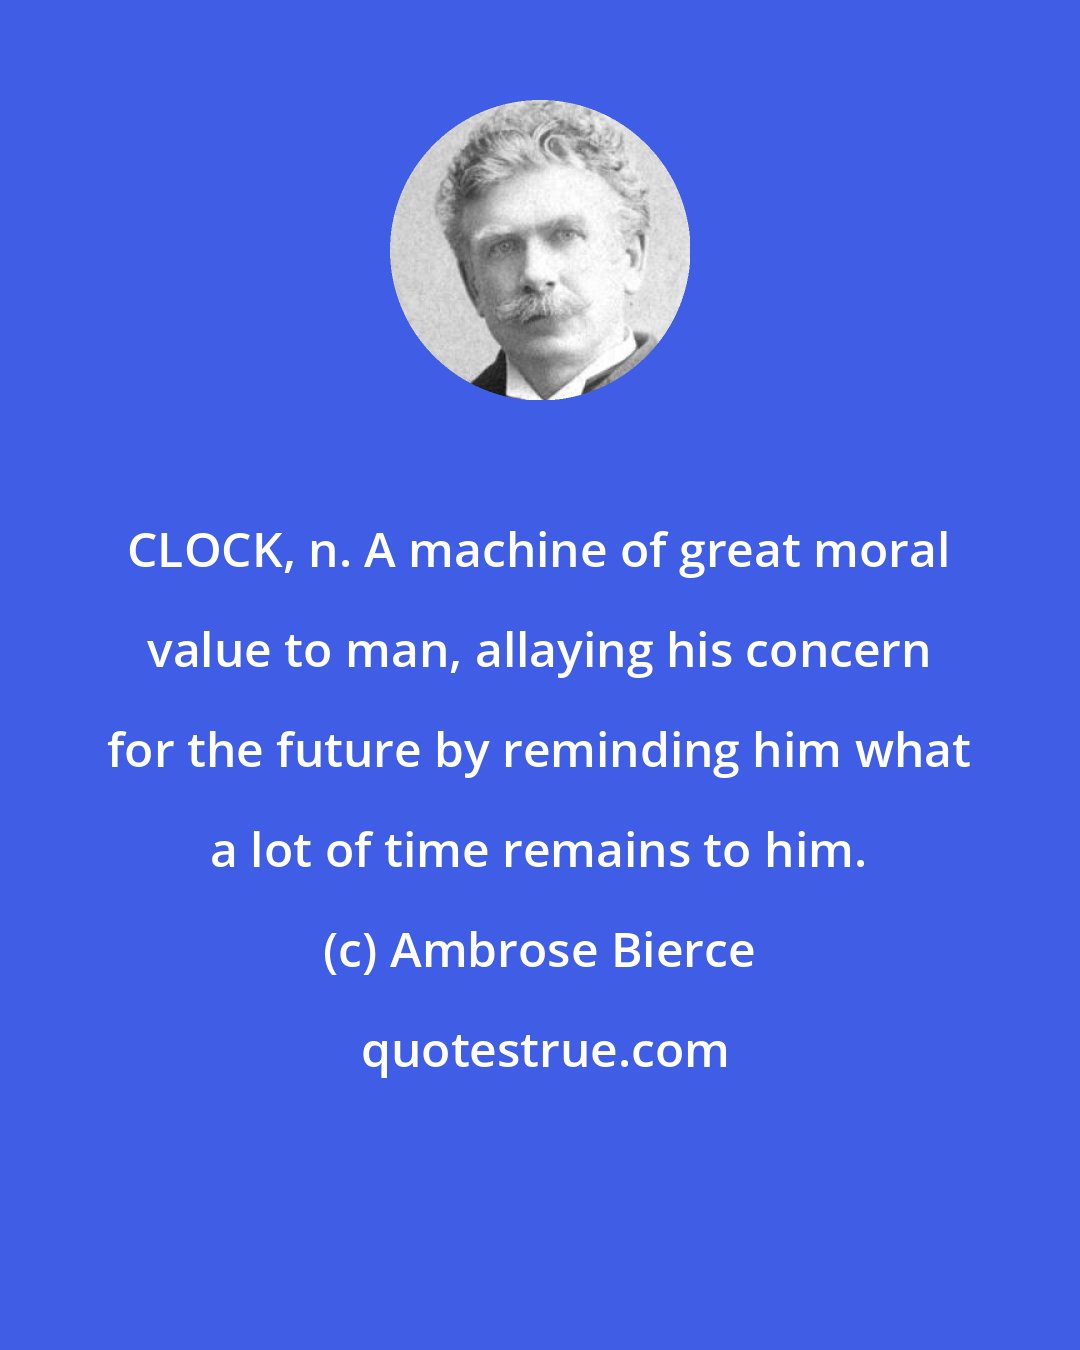 Ambrose Bierce: CLOCK, n. A machine of great moral value to man, allaying his concern for the future by reminding him what a lot of time remains to him.